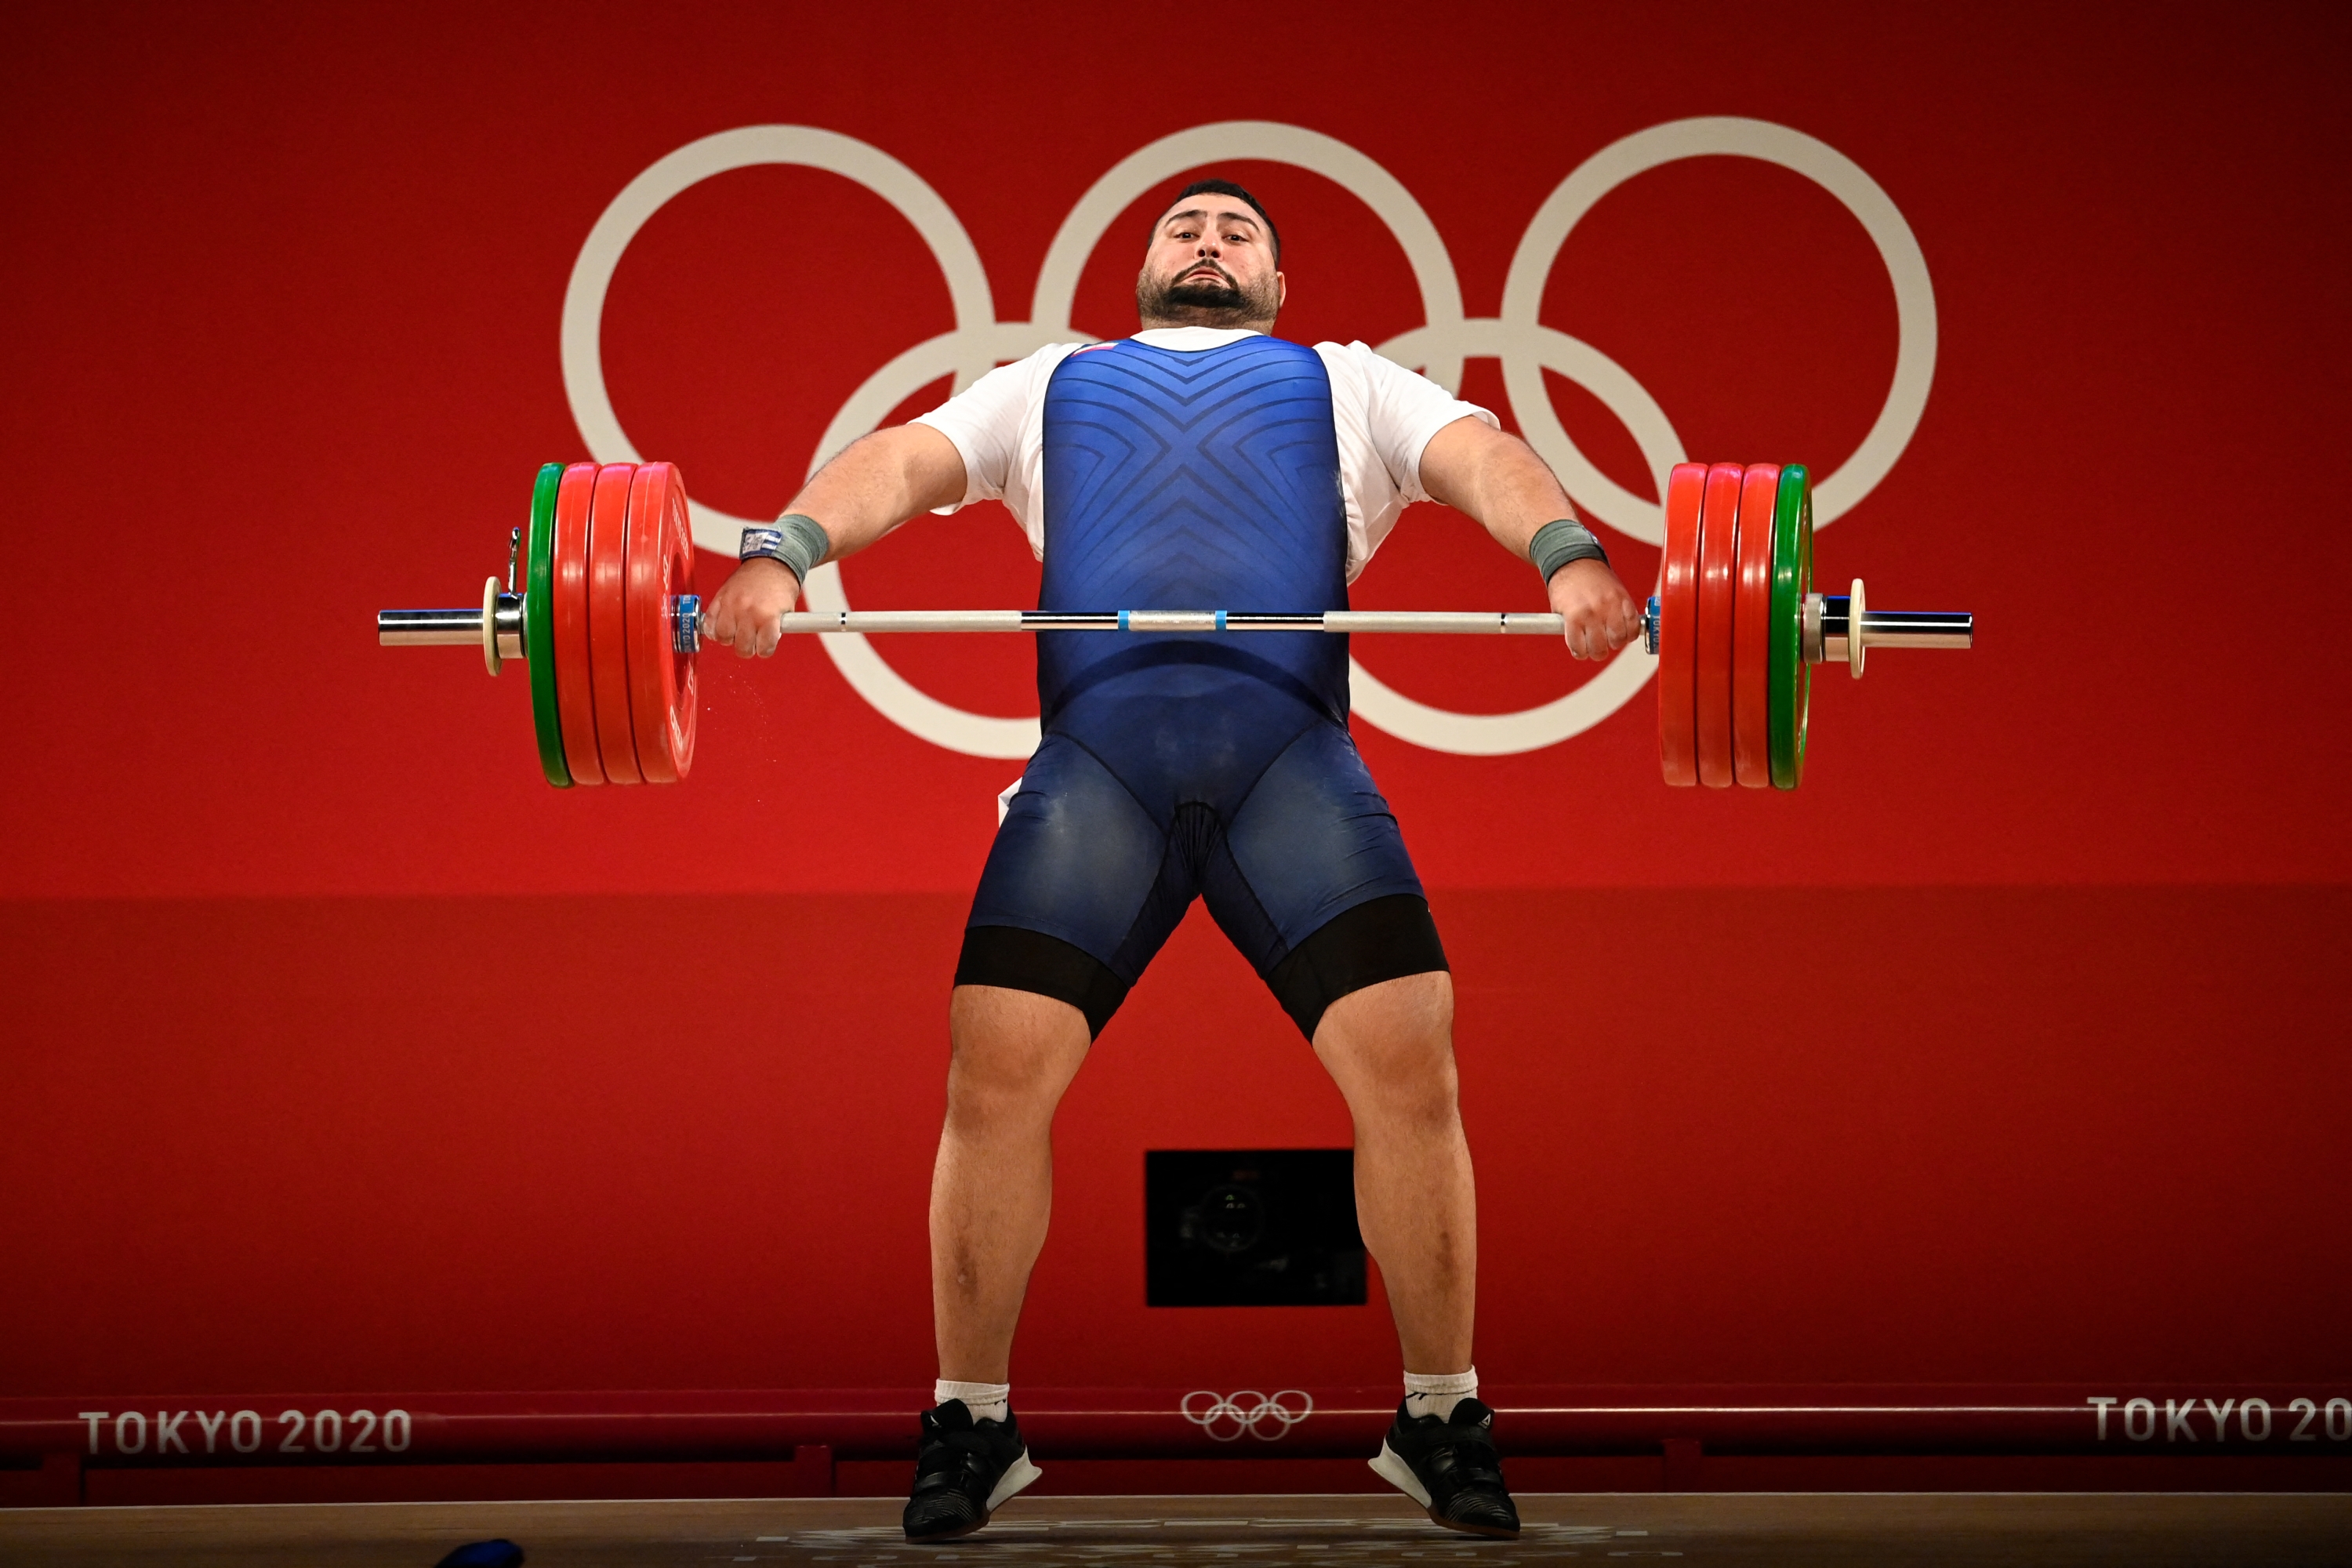 Iran's Ali Davoudi competes in the men's +109kg weightlifting competition during the Tokyo 2020 Olympic Games at the Tokyo International Forum in Tokyo on August 4, 2021. (Photo by Alexander NEMENOV / AFP)